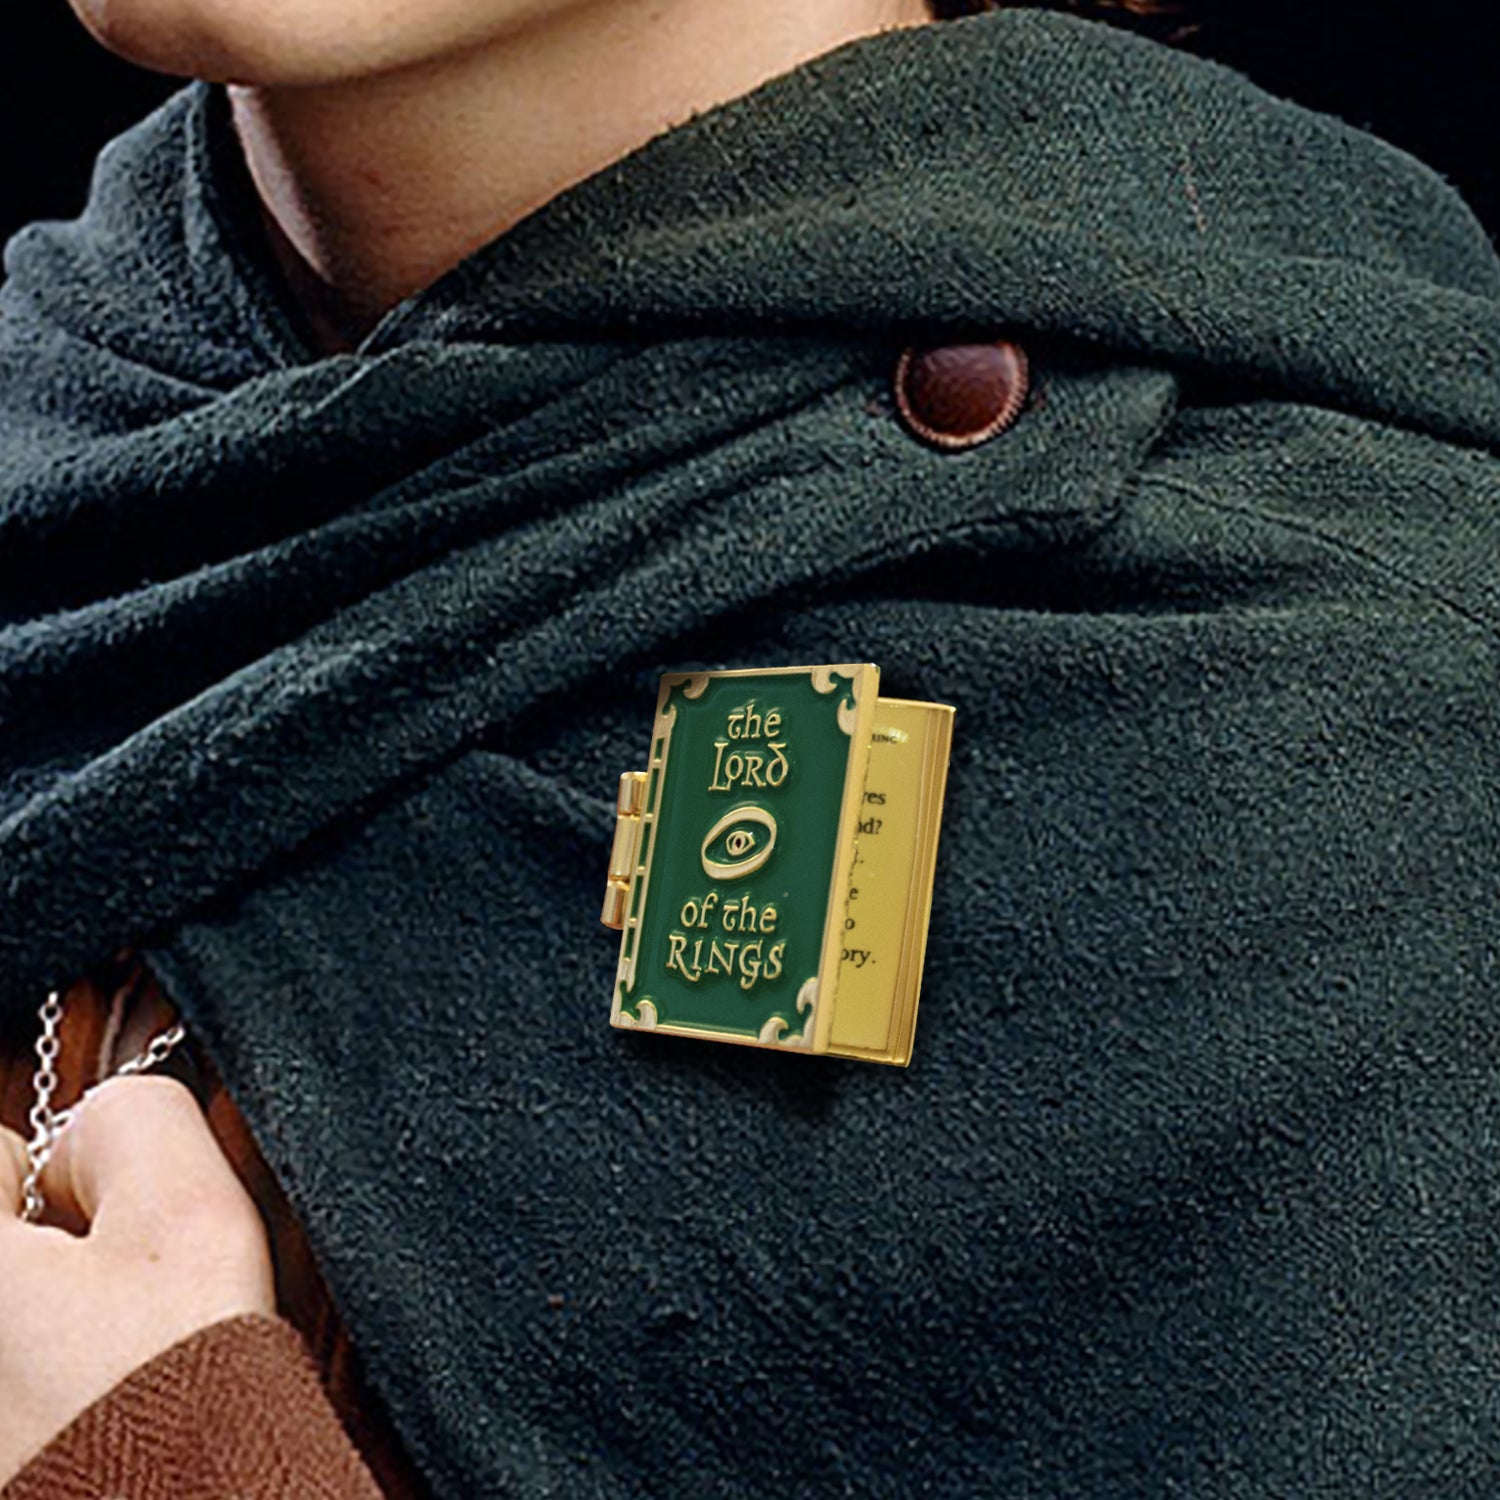 A book-shaped enamel pin, partially opened like a book, fastened to a green cloak. The front of the pin is green, with "The lord of the rings" and an image of the eye of sauron in gold. The interior of the pin is gold plated, with a quote from The Lord Of The Rings in black text.